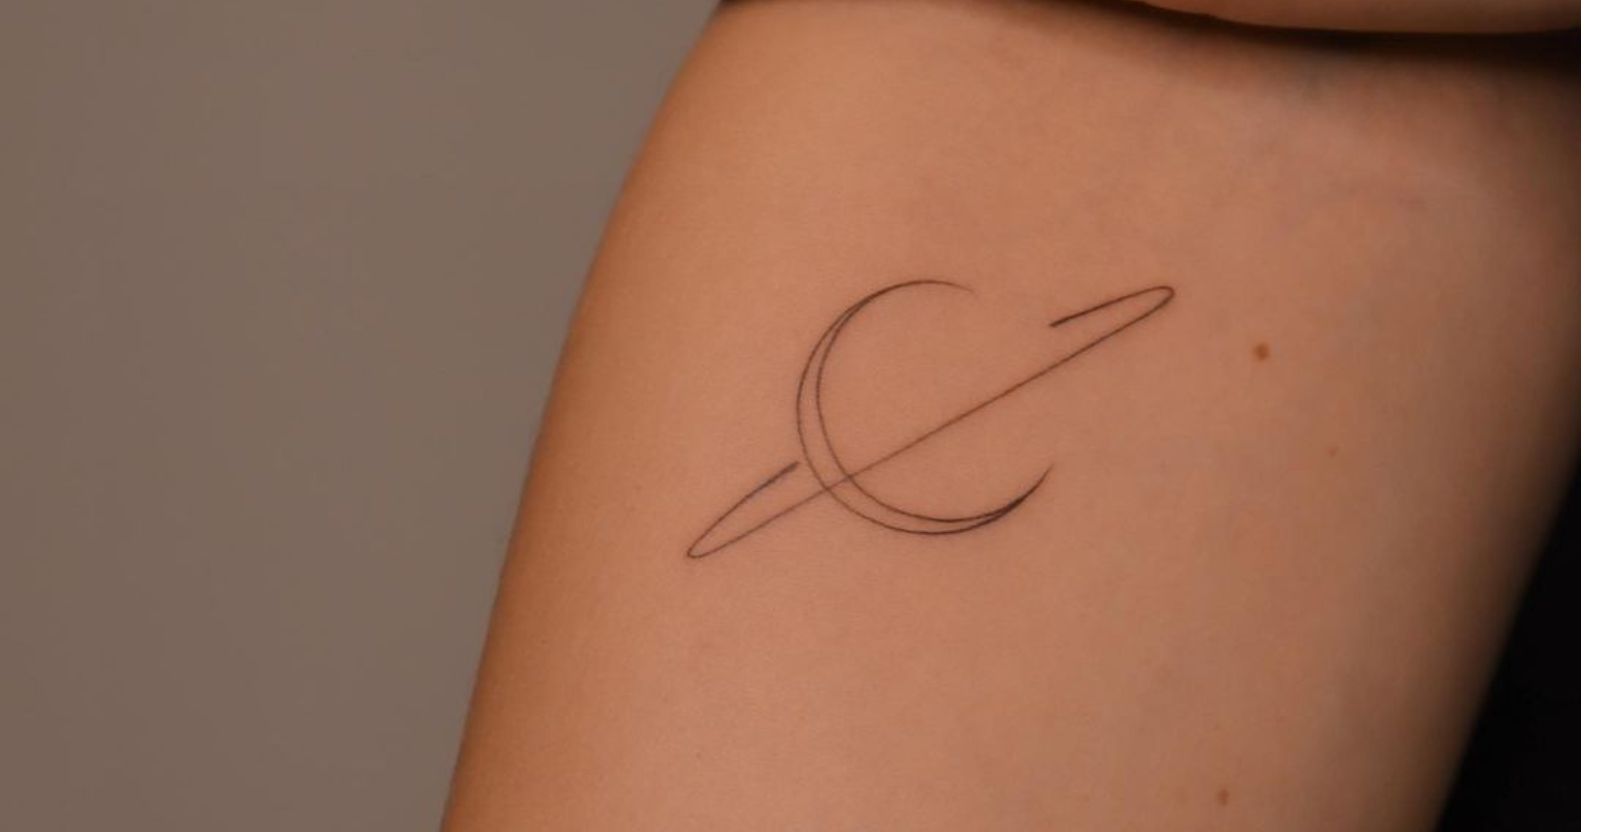 Minimal Line And Shape Tattoo Designs - Perfecto Prompts